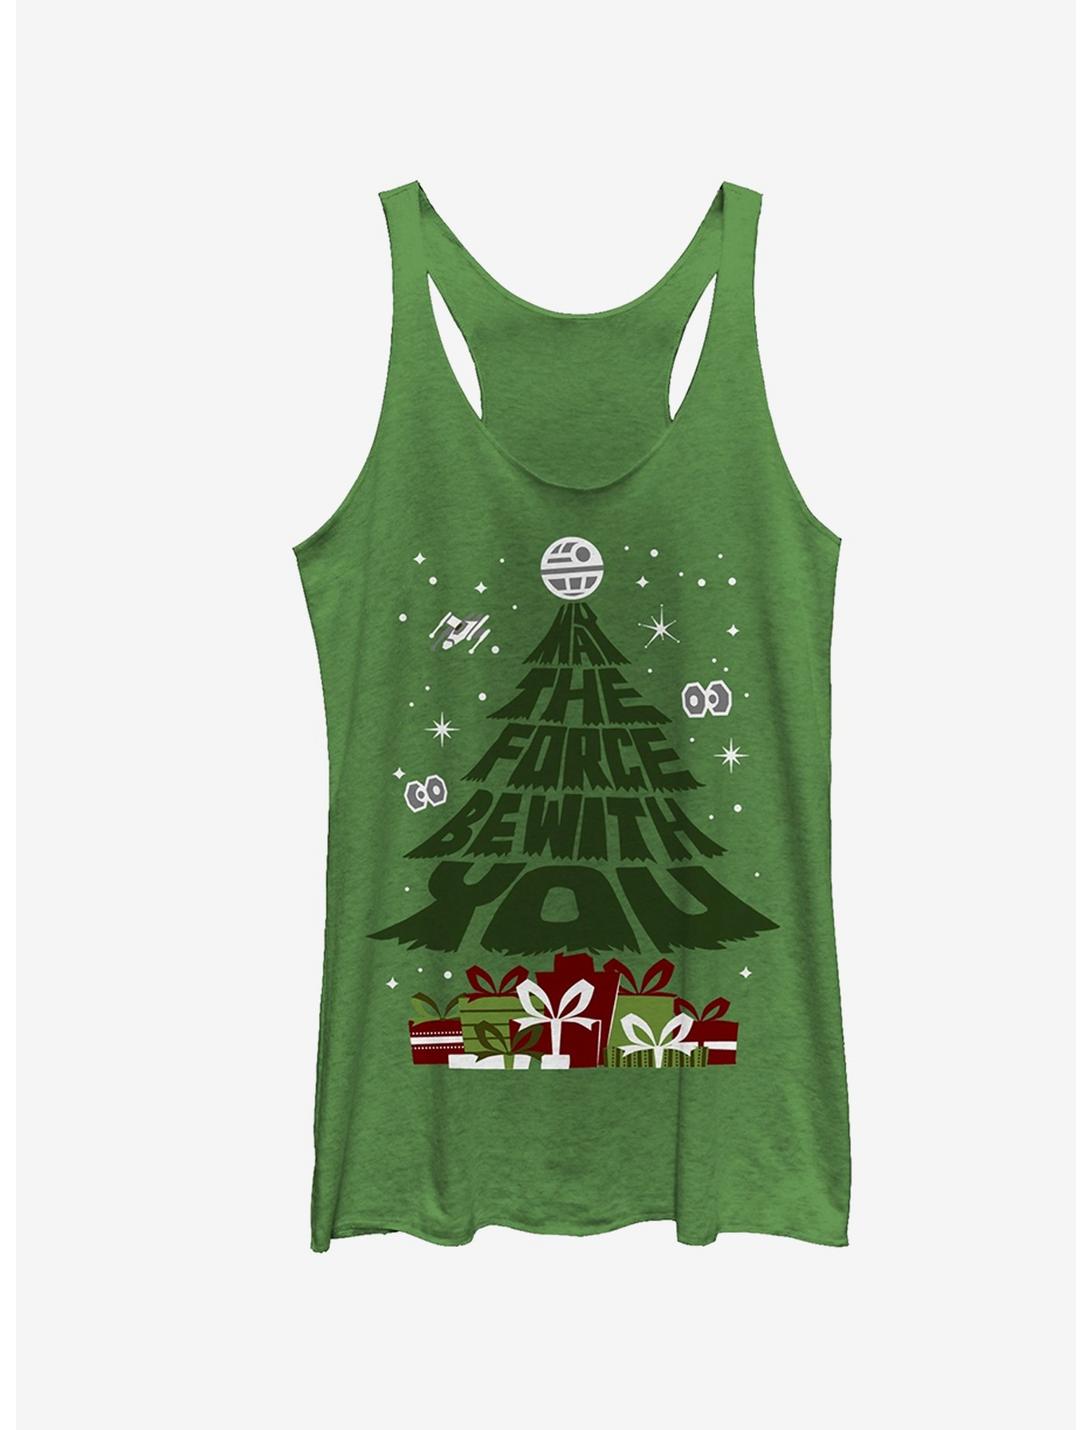 Star Wars Christmas Gifts Be With You Girls Tanks, ENVY, hi-res